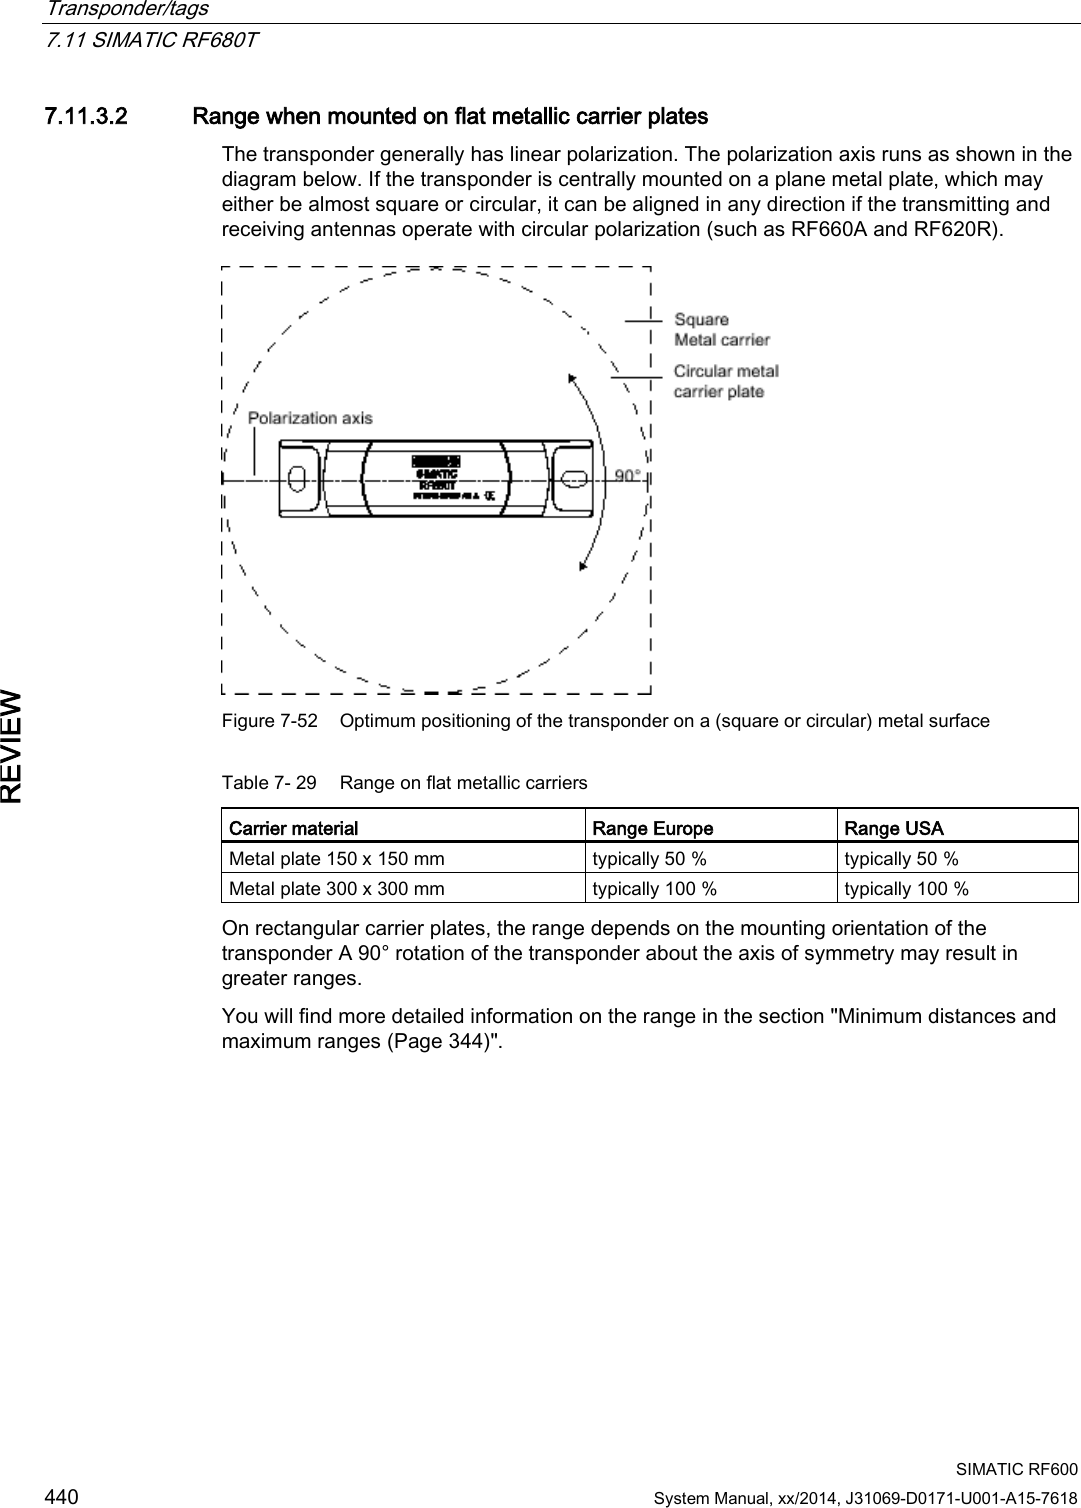 Transponder/tags   7.11 SIMATIC RF680T  SIMATIC RF600 440 System Manual, xx/2014, J31069-D0171-U001-A15-7618 REVIEW 7.11.3.2 Range when mounted on flat metallic carrier plates The transponder generally has linear polarization. The polarization axis runs as shown in the diagram below. If the transponder is centrally mounted on a plane metal plate, which may either be almost square or circular, it can be aligned in any direction if the transmitting and receiving antennas operate with circular polarization (such as RF660A and RF620R).  Figure 7-52 Optimum positioning of the transponder on a (square or circular) metal surface Table 7- 29 Range on flat metallic carriers Carrier material Range Europe Range USA Metal plate 150 x 150 mm typically 50 % typically 50 % Metal plate 300 x 300 mm typically 100 % typically 100 % On rectangular carrier plates, the range depends on the mounting orientation of the transponder A 90° rotation of the transponder about the axis of symmetry may result in greater ranges.  You will find more detailed information on the range in the section &quot;Minimum distances and maximum ranges (Page 344)&quot;. 